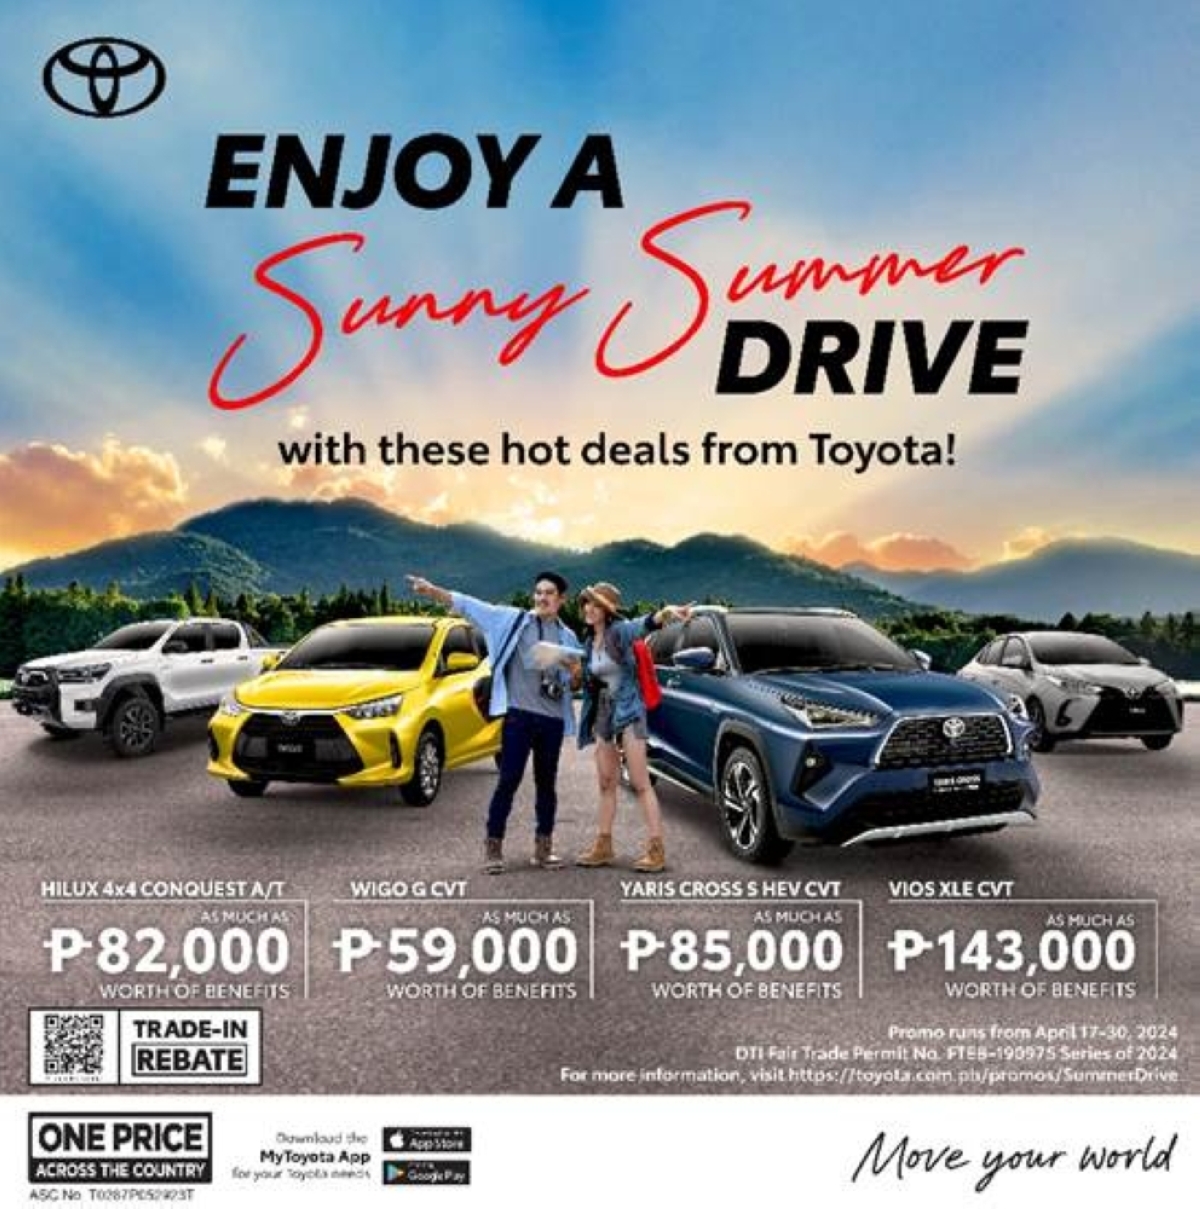 enjoy a sunny summer drive with these hot toyota deals